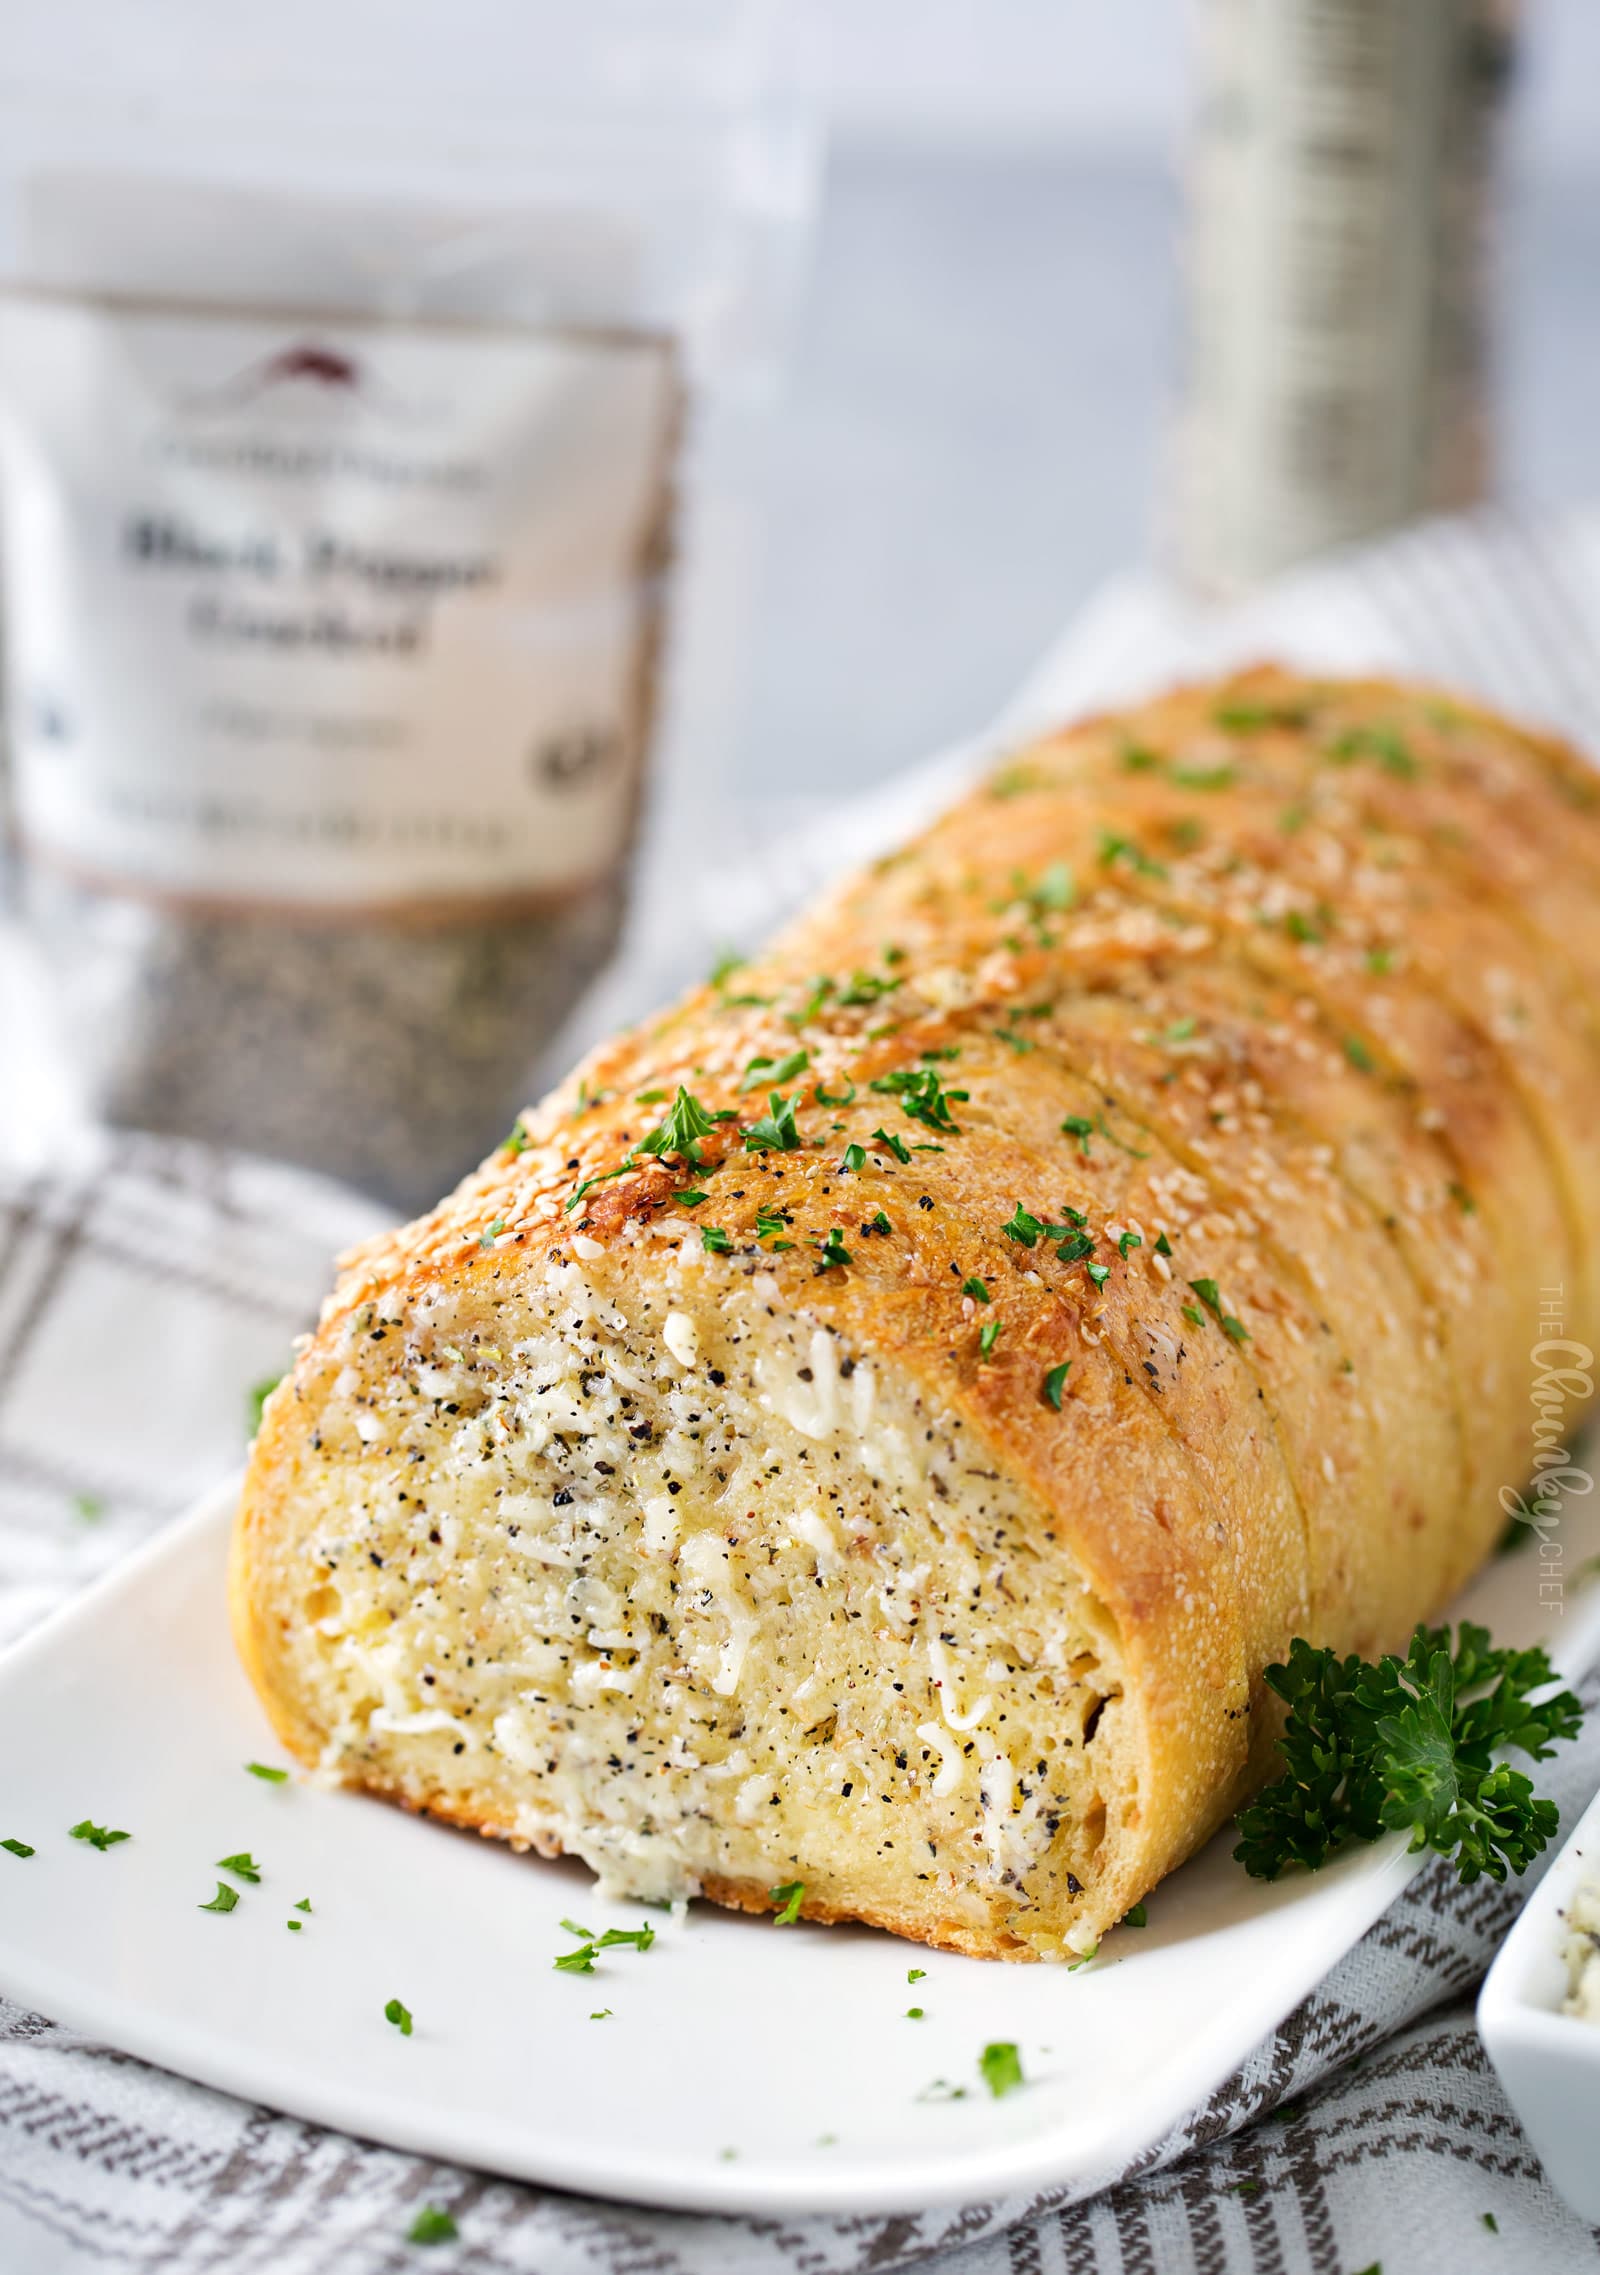 Homemade Garlic Bread (with a cheesy option) - The Chunky Chef
